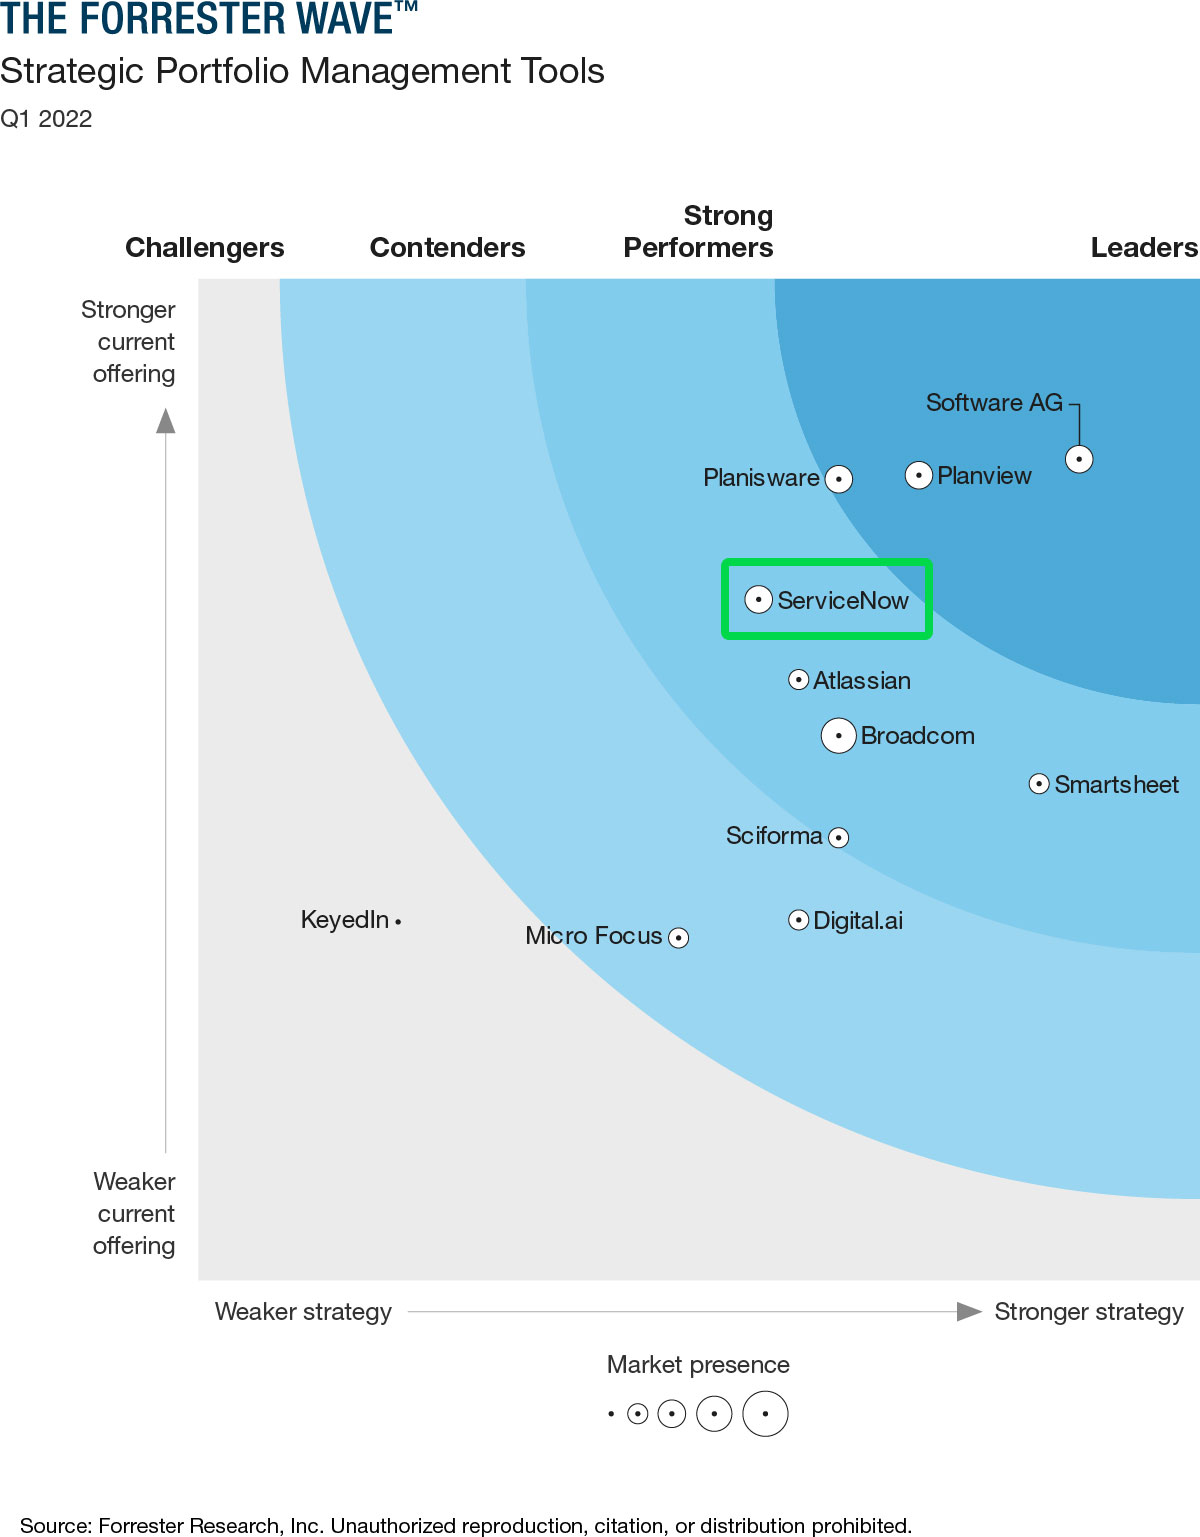 The first quarter 2022 Forrester Wave for Strategic Portfolio Management Tools places ServiceNow Strategic Portfolio Management in the Strong Performer category. 